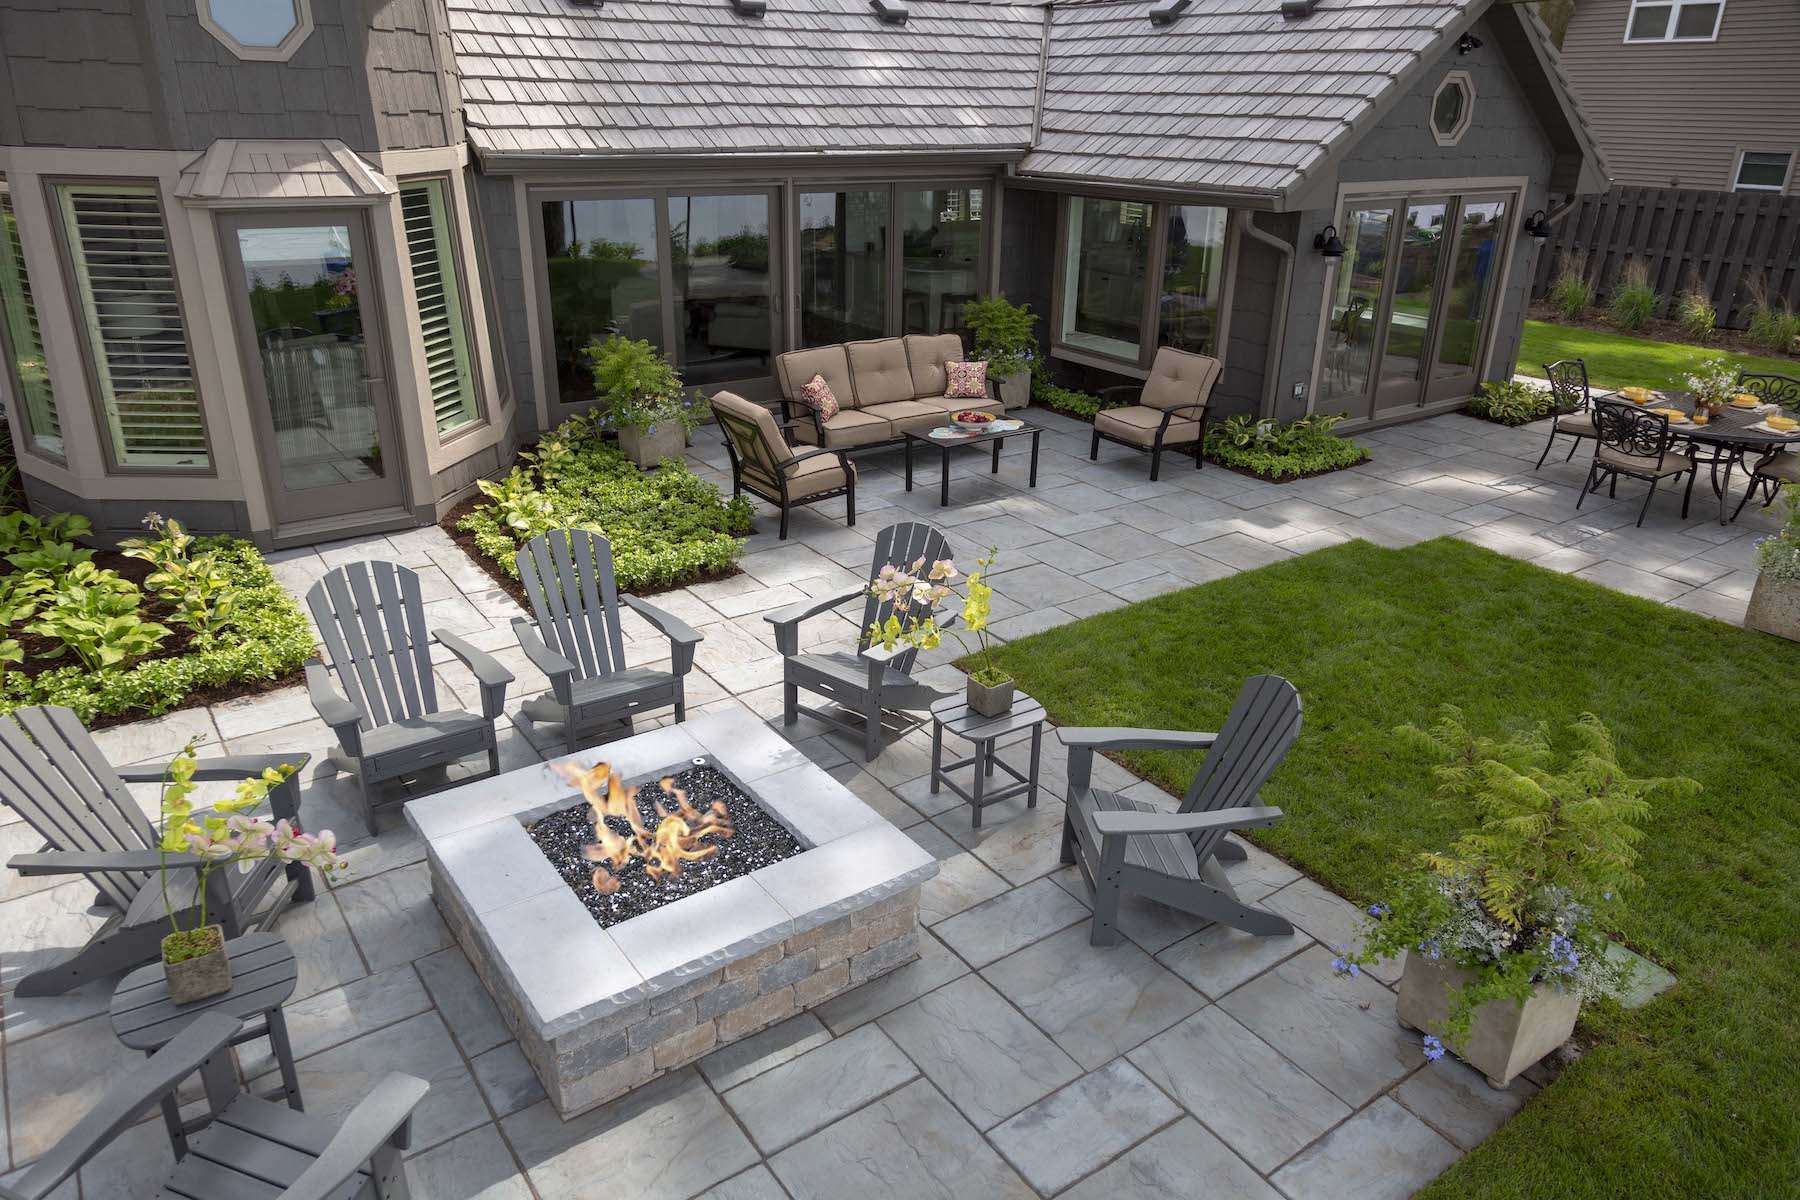 Fire pit and natural stone patio